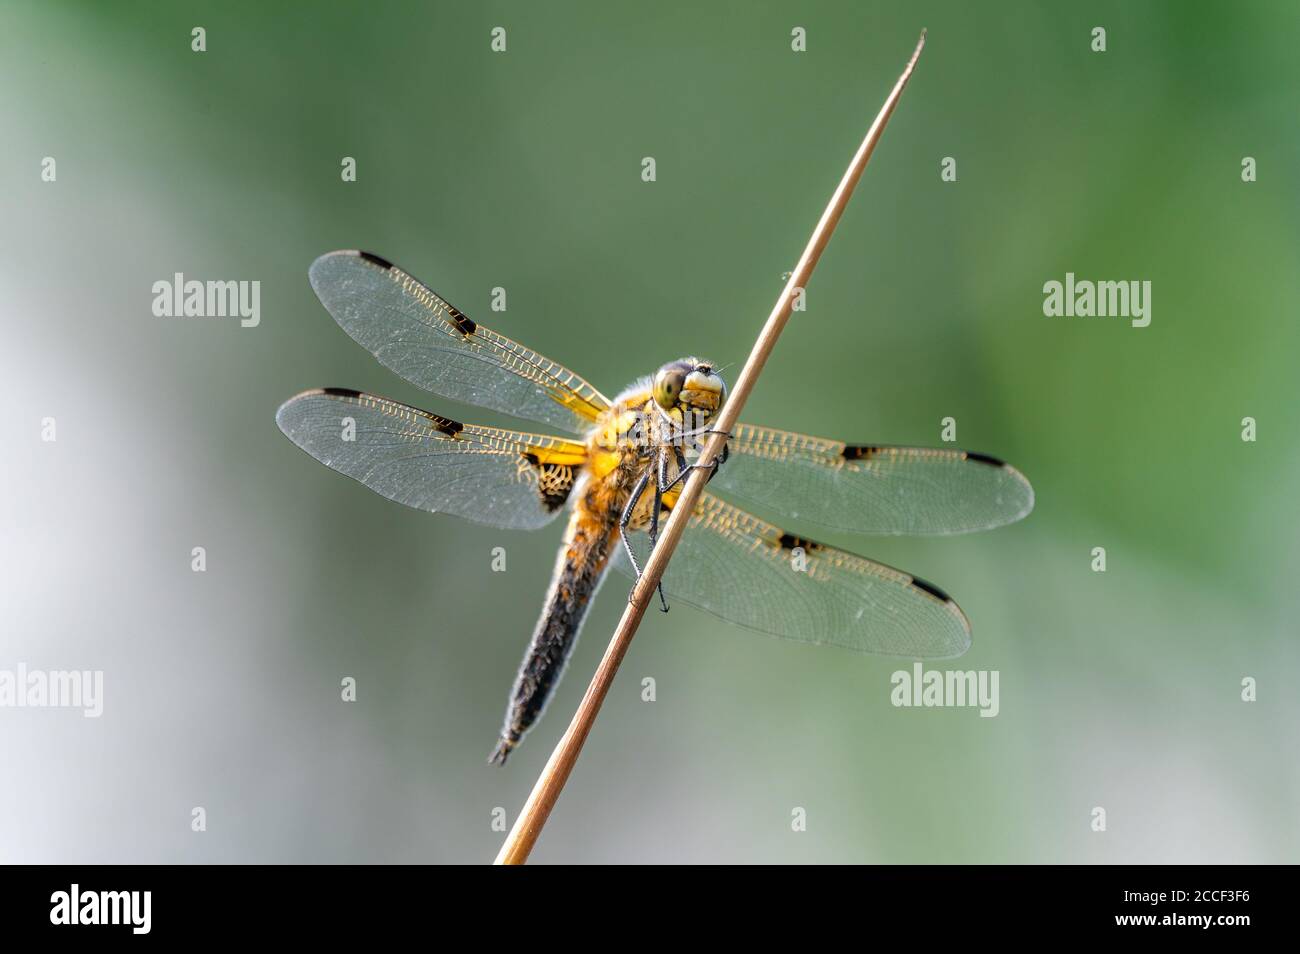 Four-spotted chaser (Libellula quadrimaculata) dragonfly on blades of grass, nice close-up with details. Stock Photo